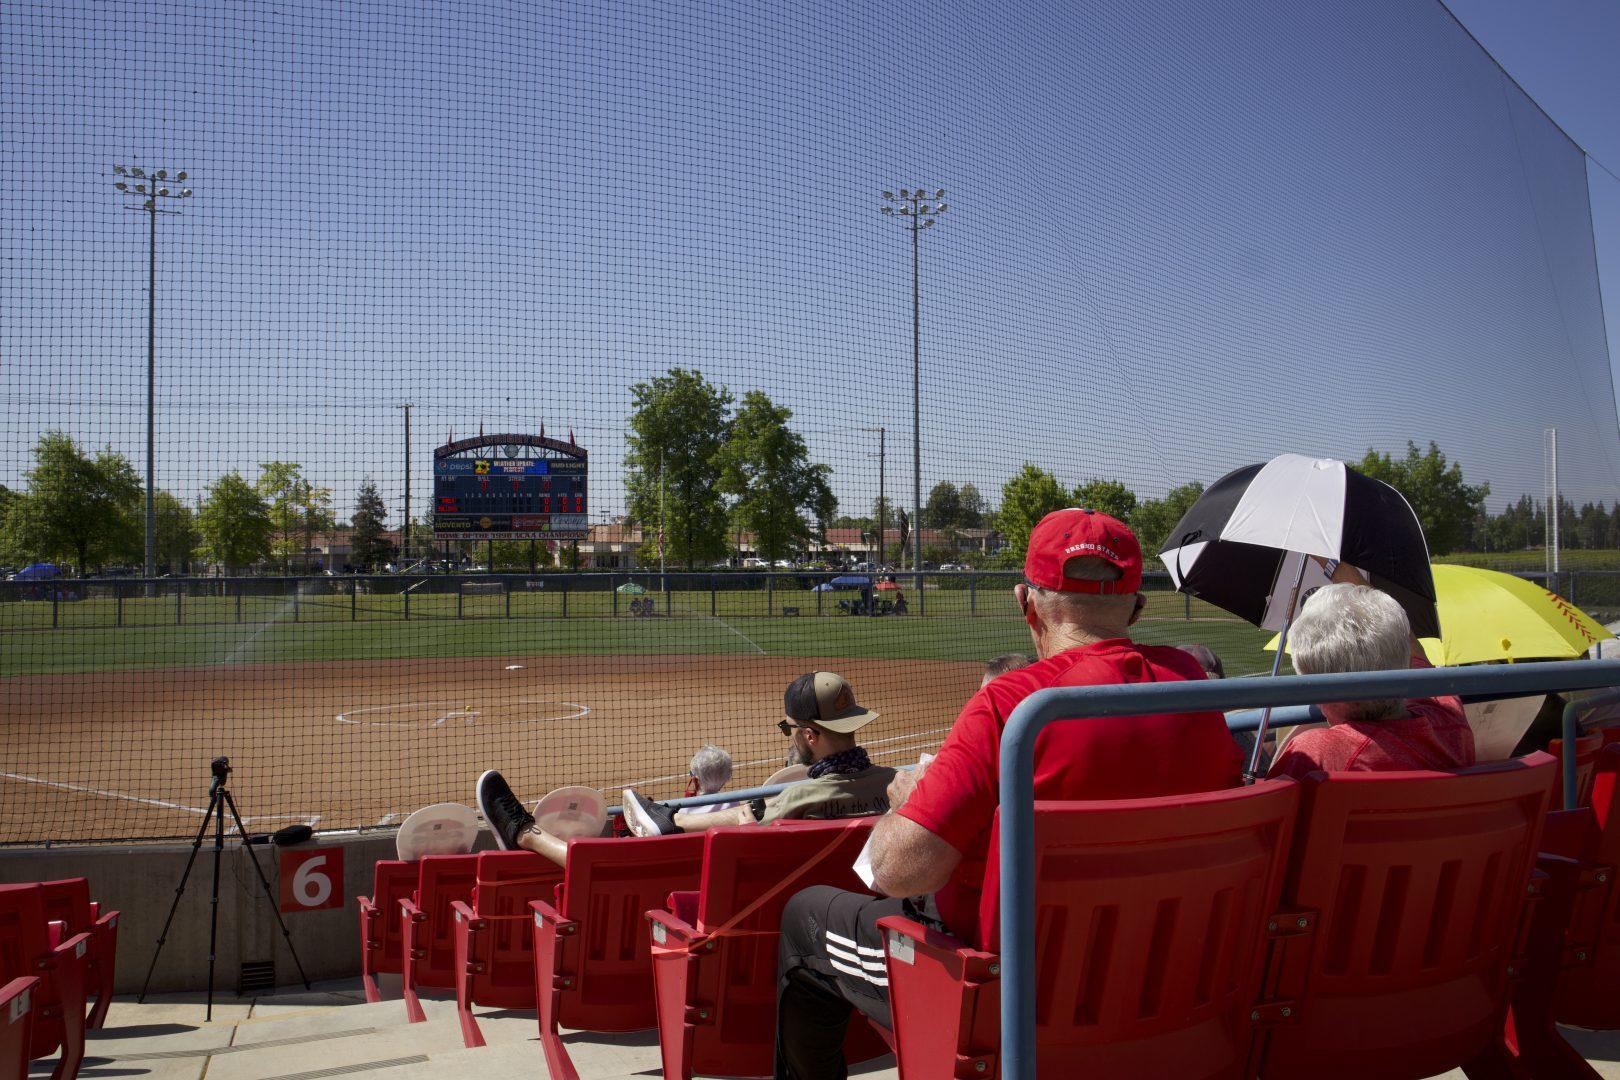 Fans made their way back to the stands at Fresno States doubleheader. (Halle Sembritzki/The Collegian)